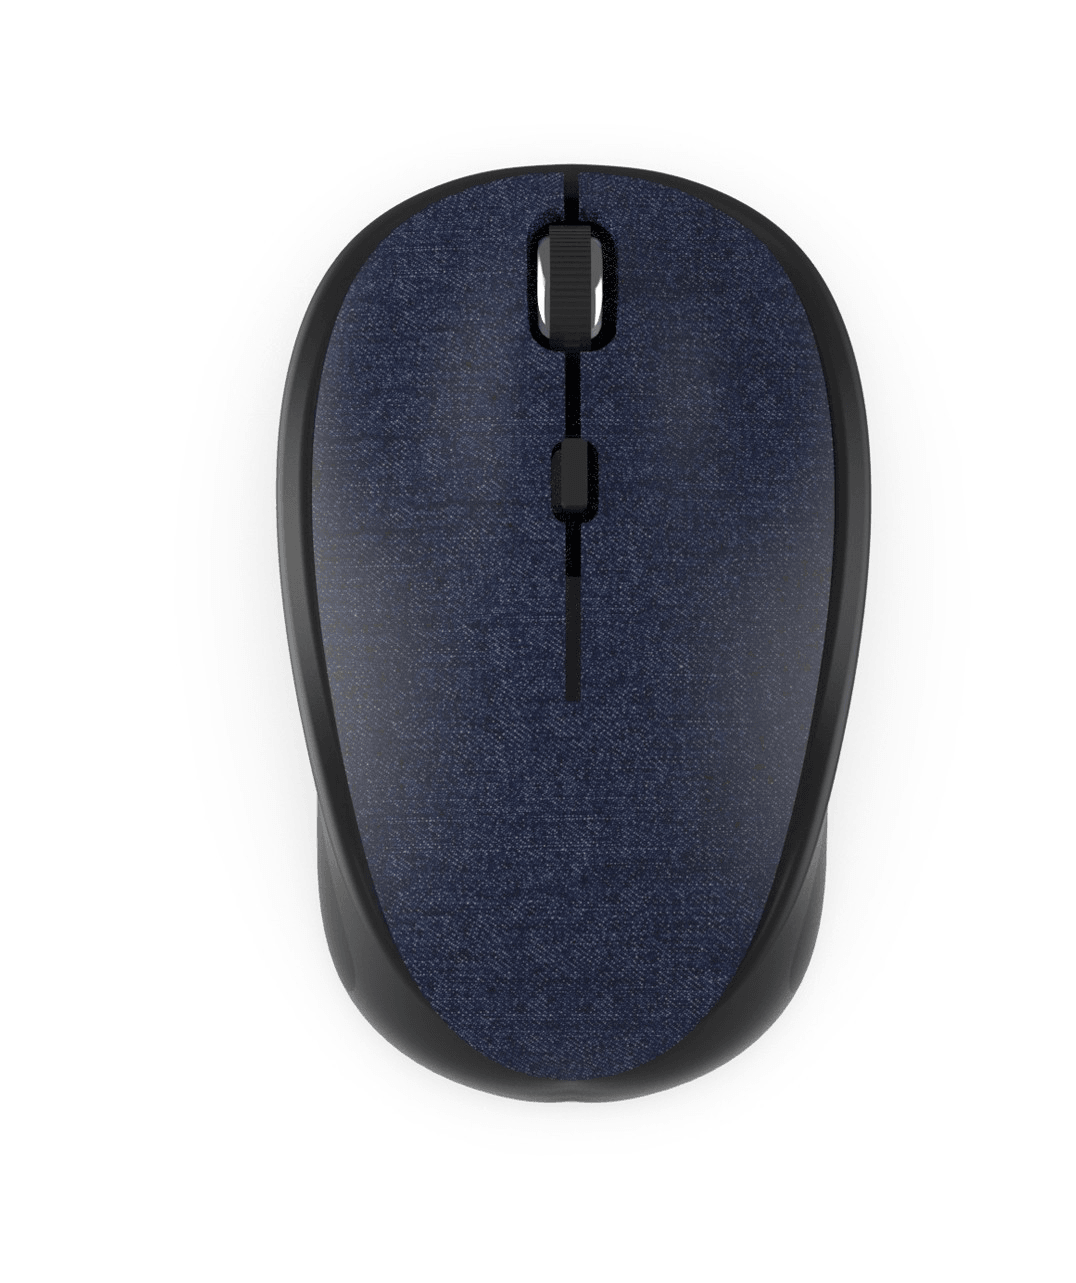 INCA IWM-300RL WIRELESS MOUSE WITH FABRIC SURFACE